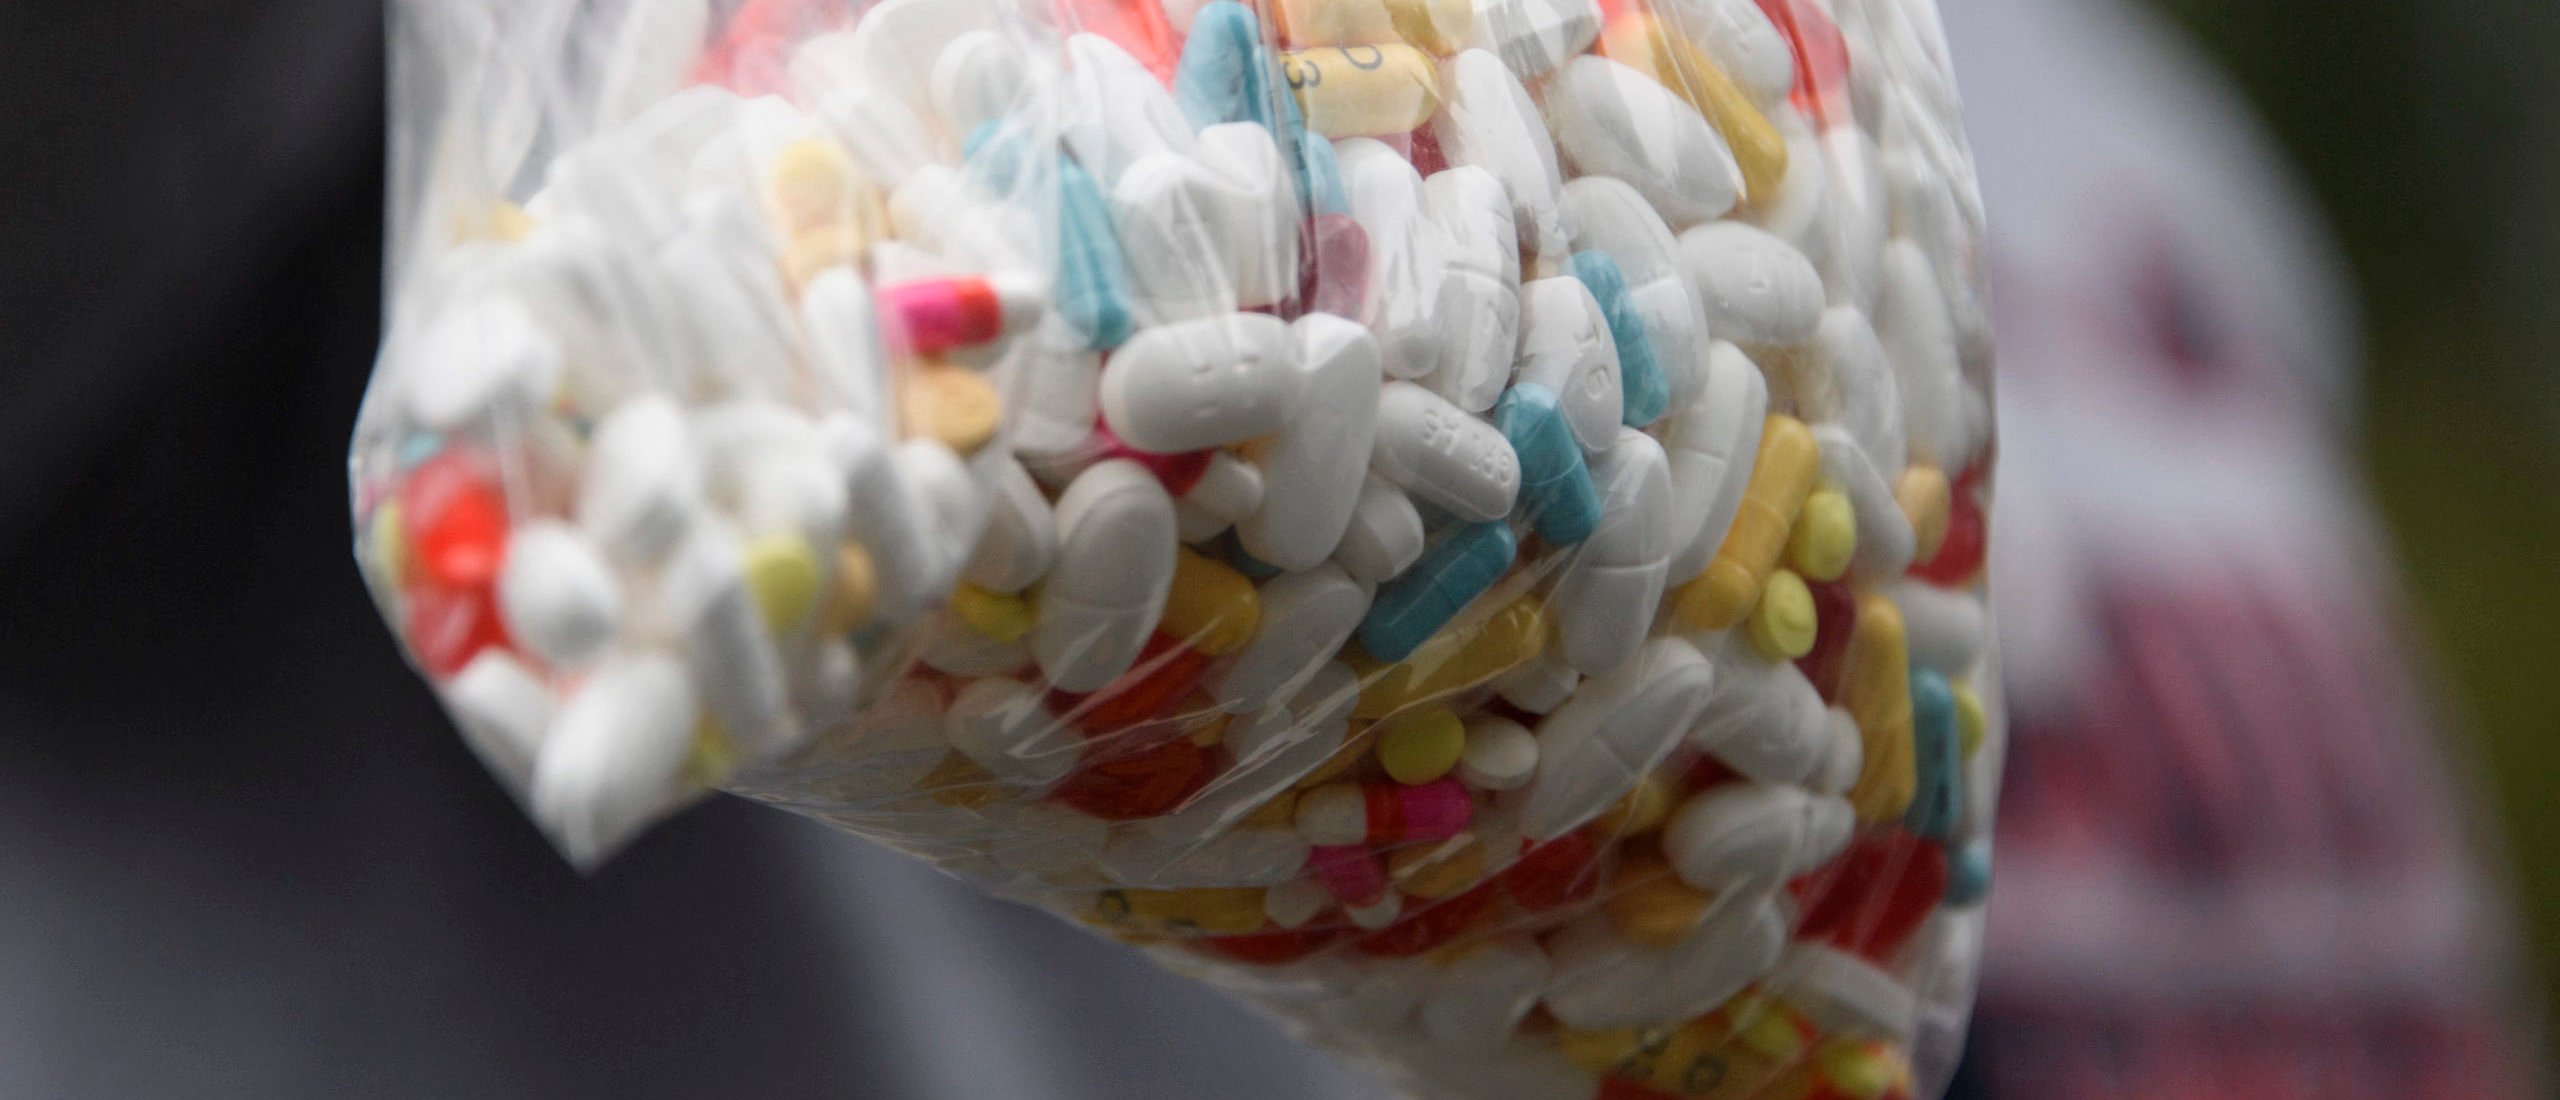 A bag of assorted pills and prescription drugs dropped off for disposal is displayed during the Drug Enforcement Administration (DEA) 20th National Prescription Drug Take Back Day at Watts Healthcare on April 24, 2021 in Los Angeles, California. (Photo by PATRICK T. FALLON/AFP via Getty Images)